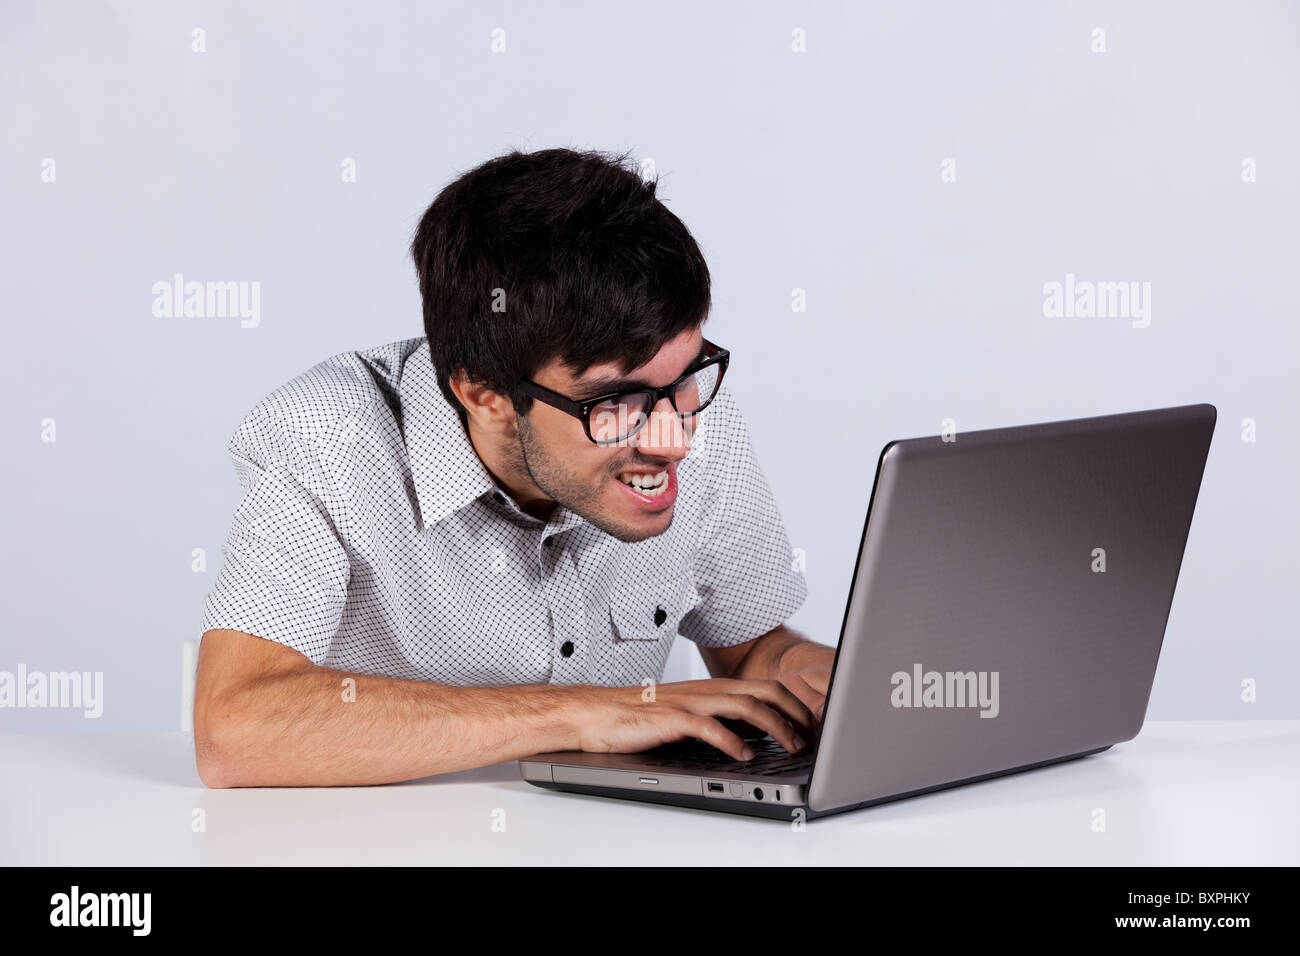 nerd-teenager-working-with-his-laptop-with-a-funny-face-BXPHKY.jpg